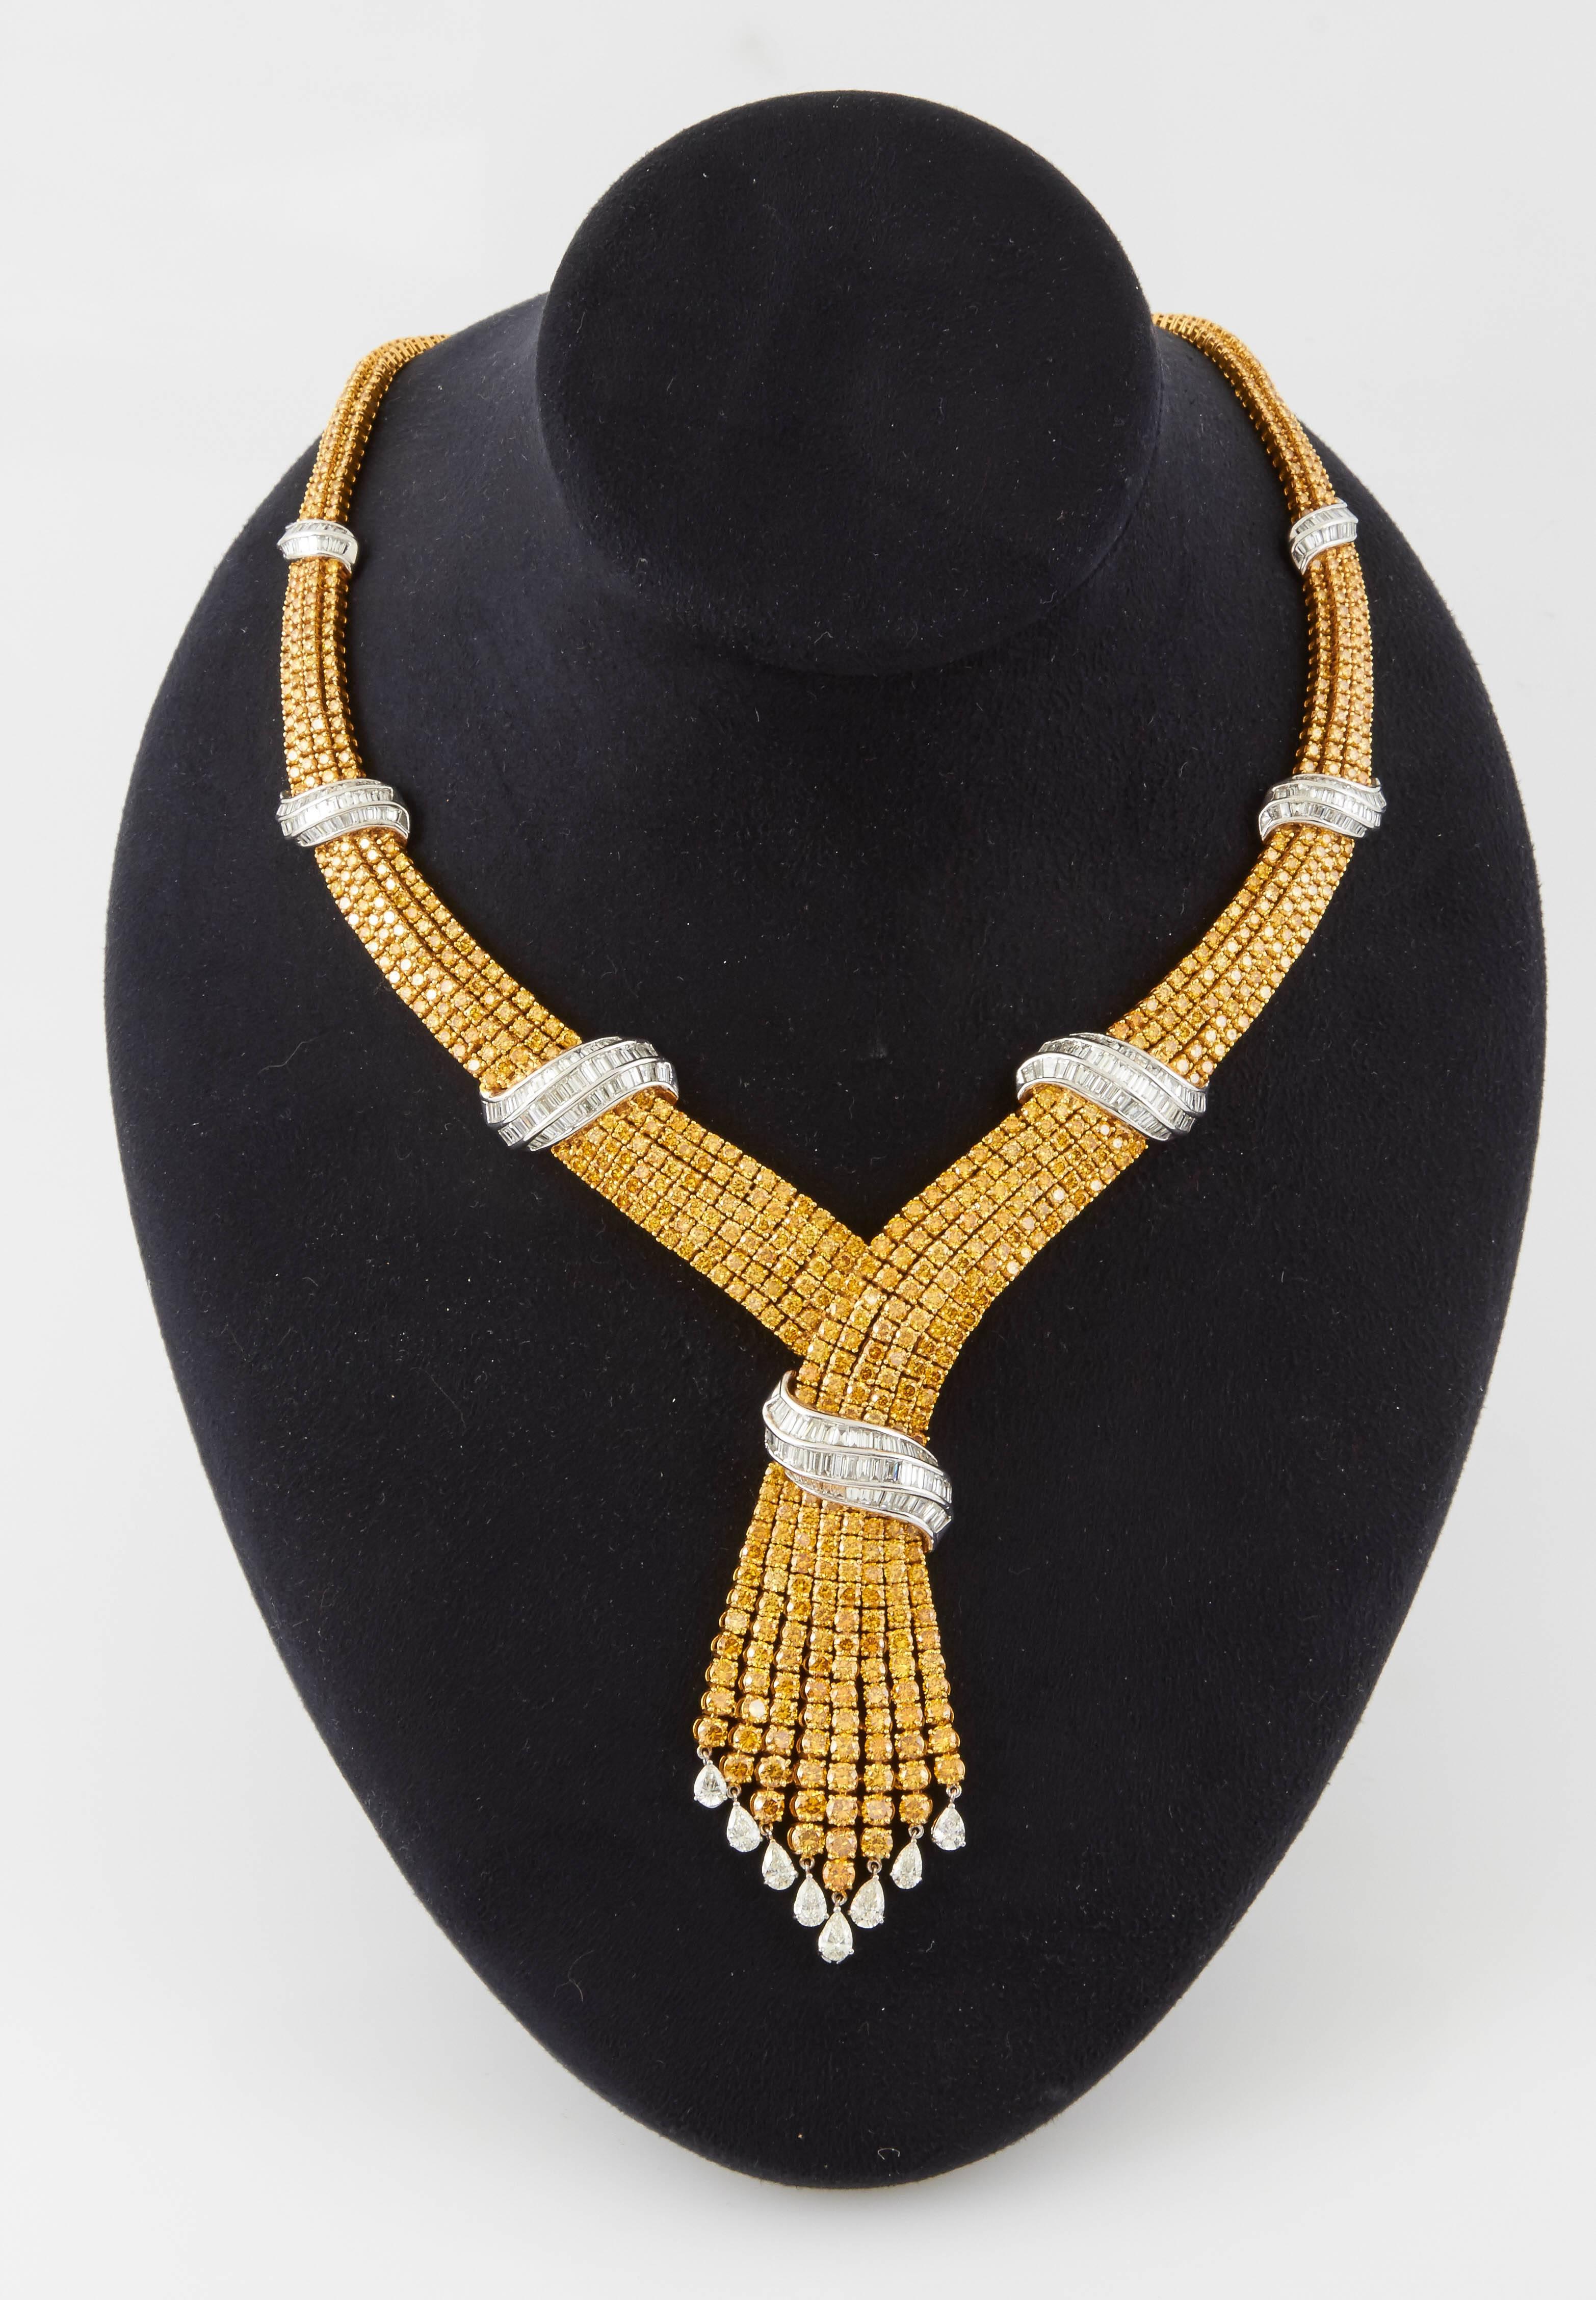 48.40 Carat Yellow Diamond and 17.06 Carat Diamond Necklace and Earrings Set For Sale 3